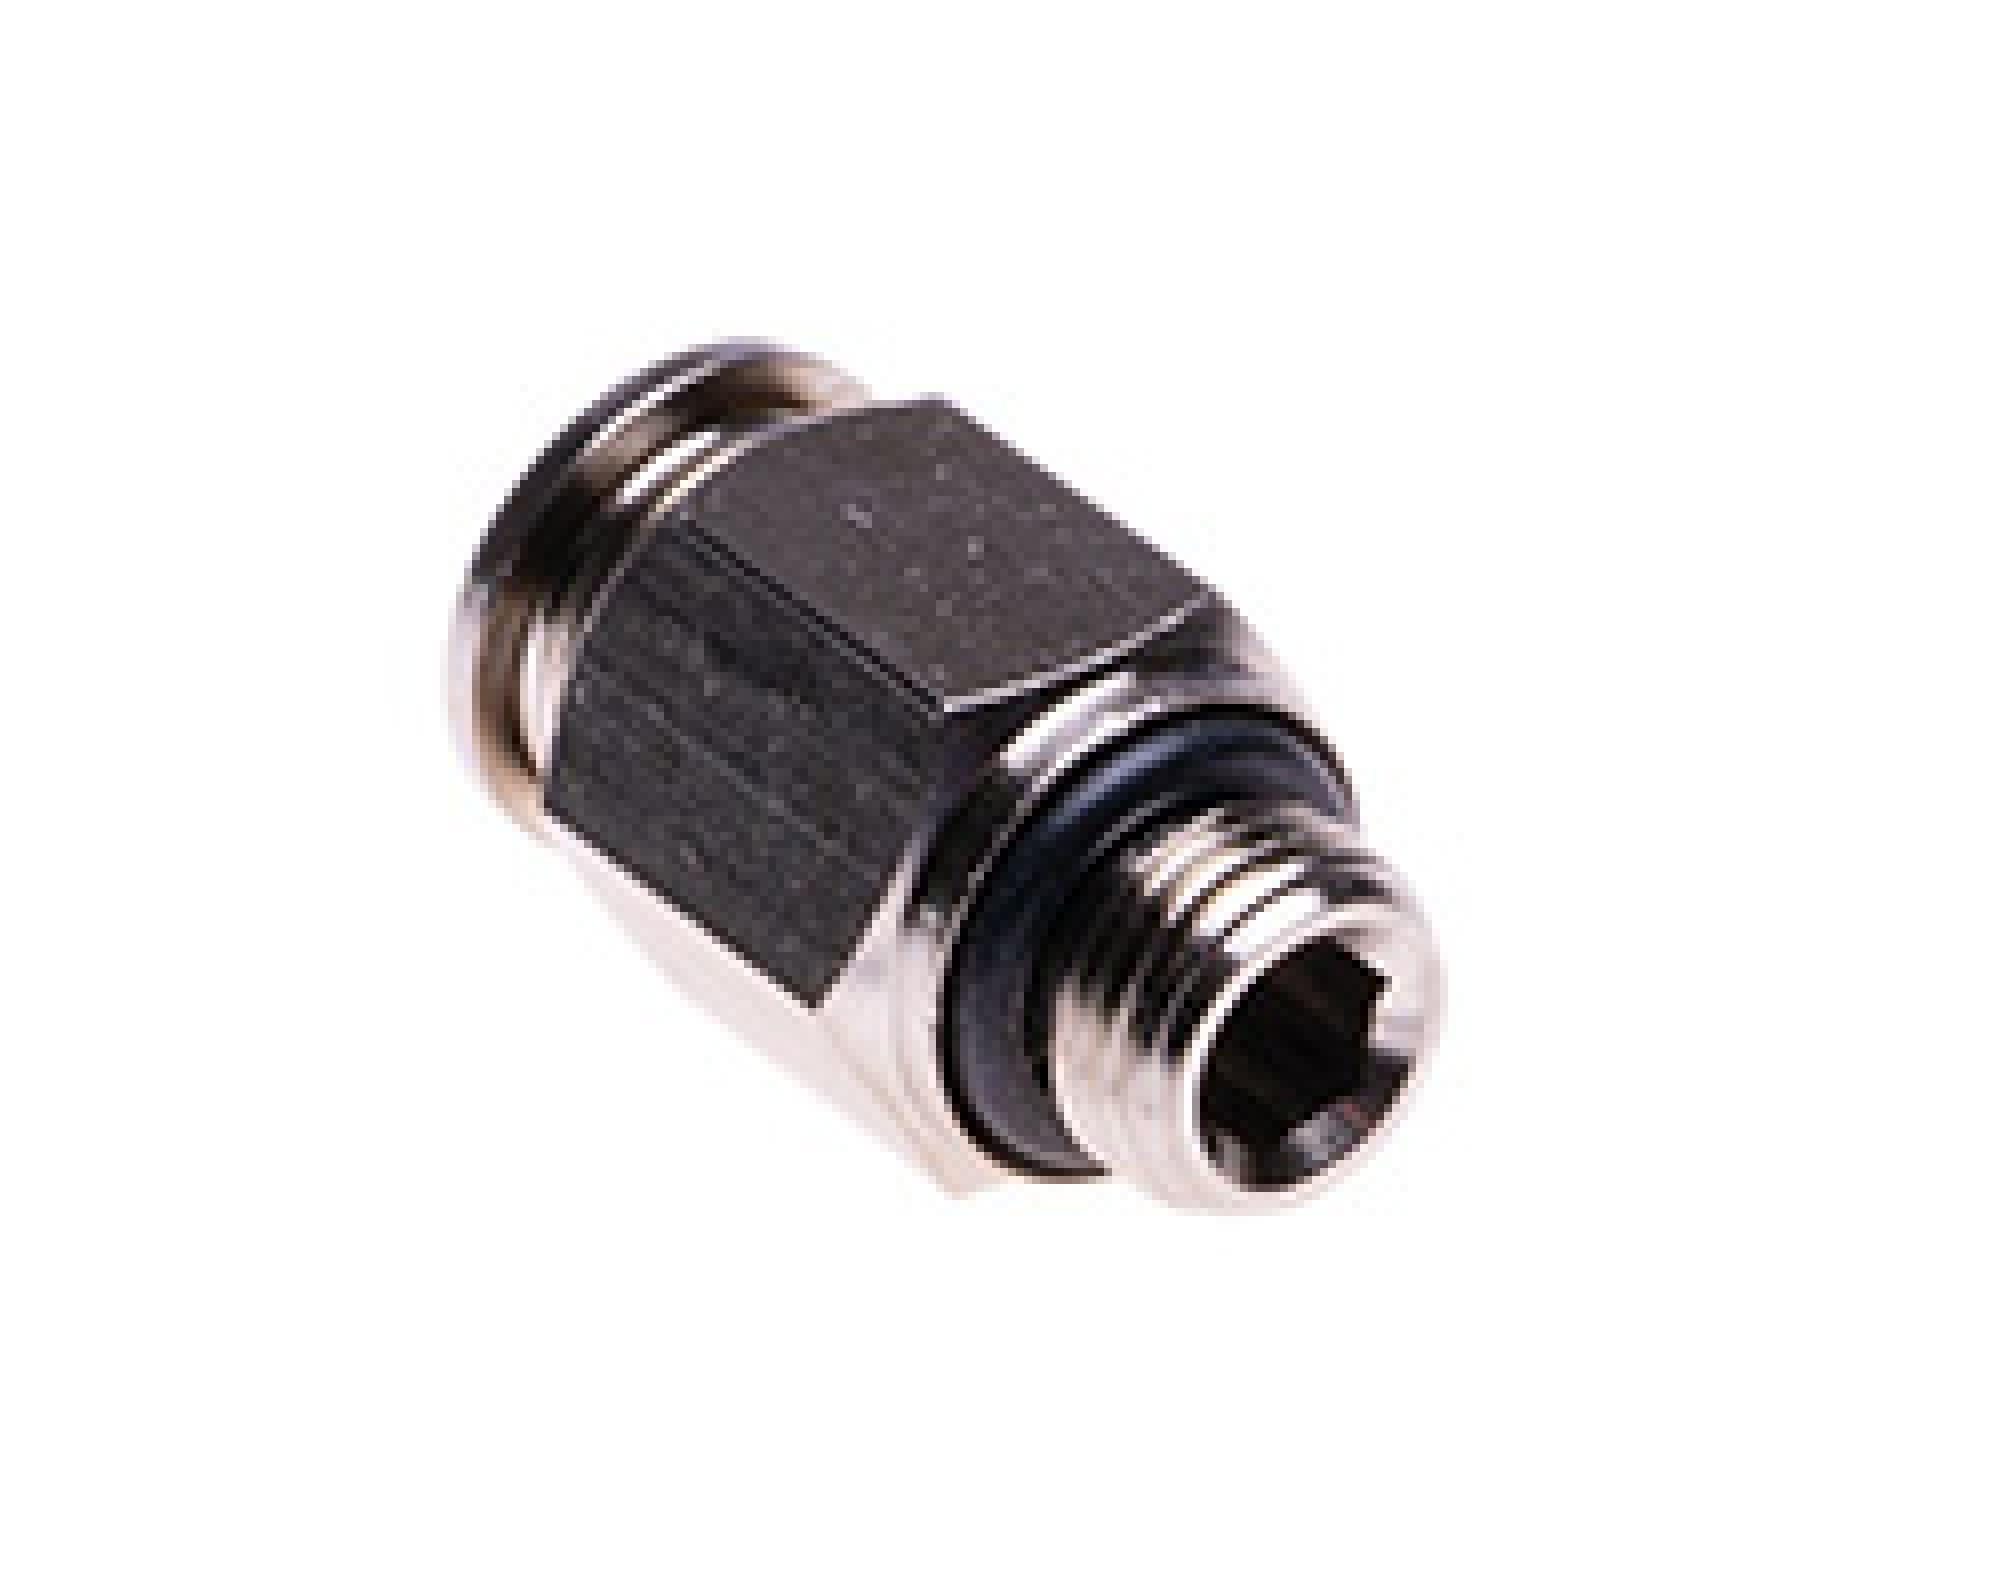 Straight screw-in fitting 1/8" for Ø 8 mm hose